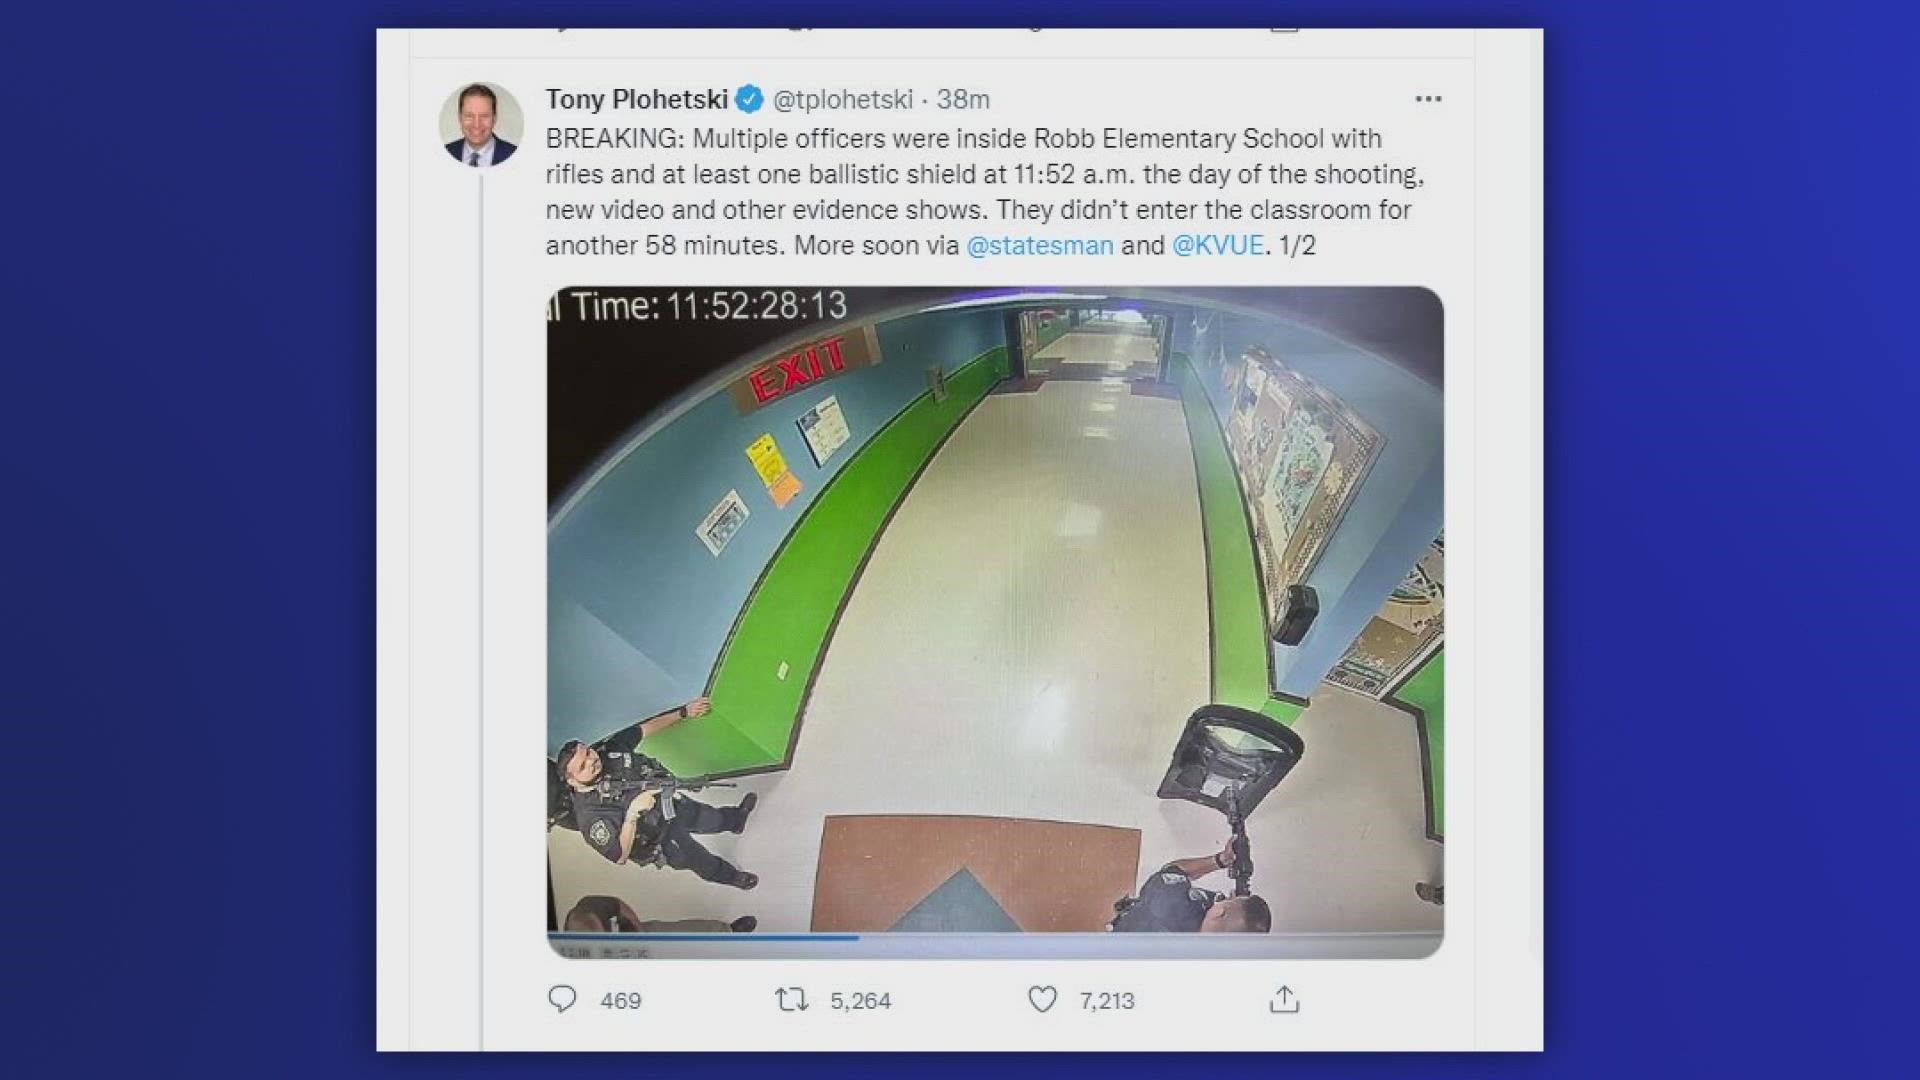 Tony Plohetski, from KVUE and Austin American-Statesman, obtained a surveillance image from inside Robb Elementary during the Uvalde shooting. He spoke with WFAA.